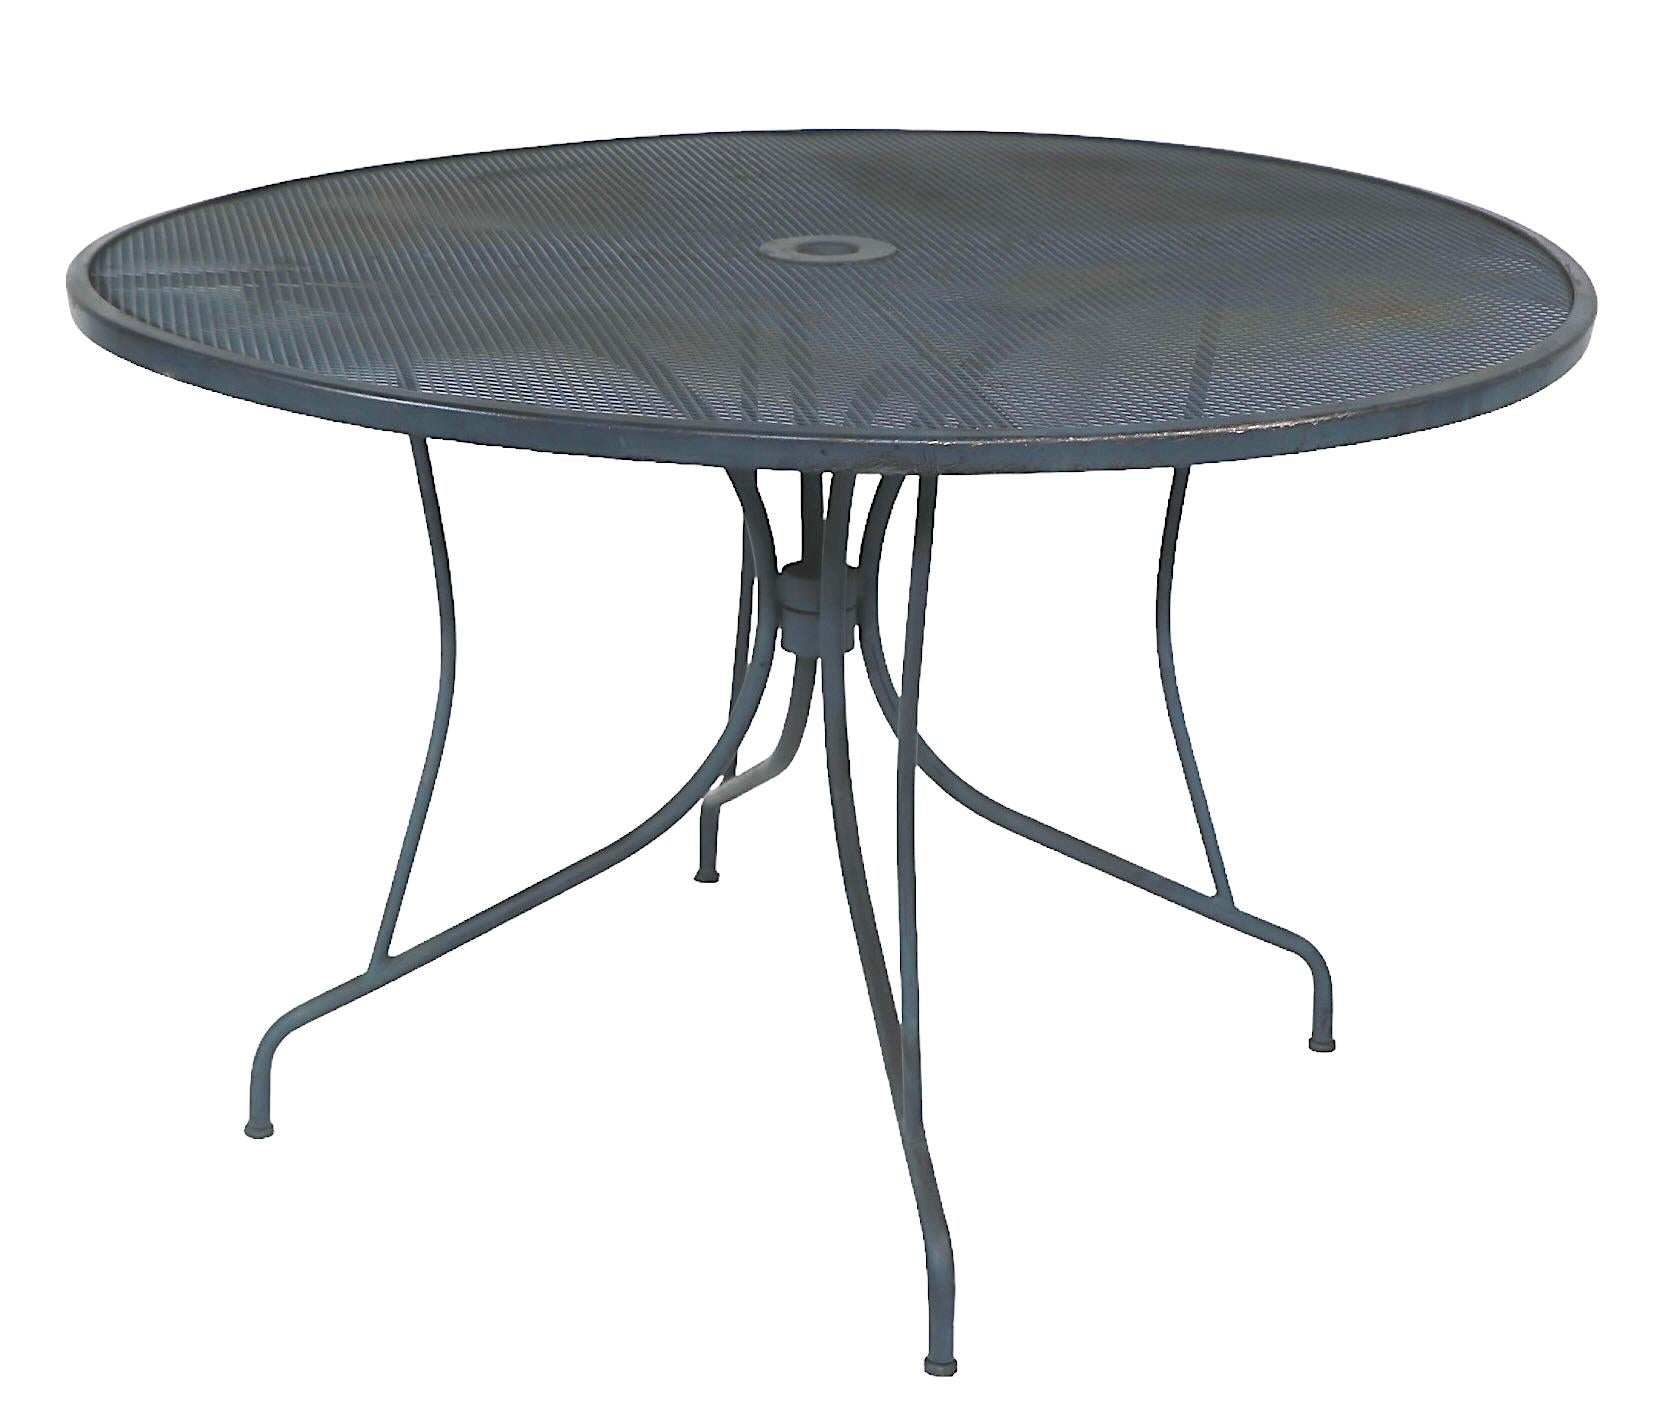 Vintage garden, patio, poolside cafe style dining table by Meadowcraft, in the style of Woodard, Homecrest etc. circa 1950/60's. Constructed of tubular metal, with a metal mesh top, features a center hole to accommodate an umbrella.  The table is in